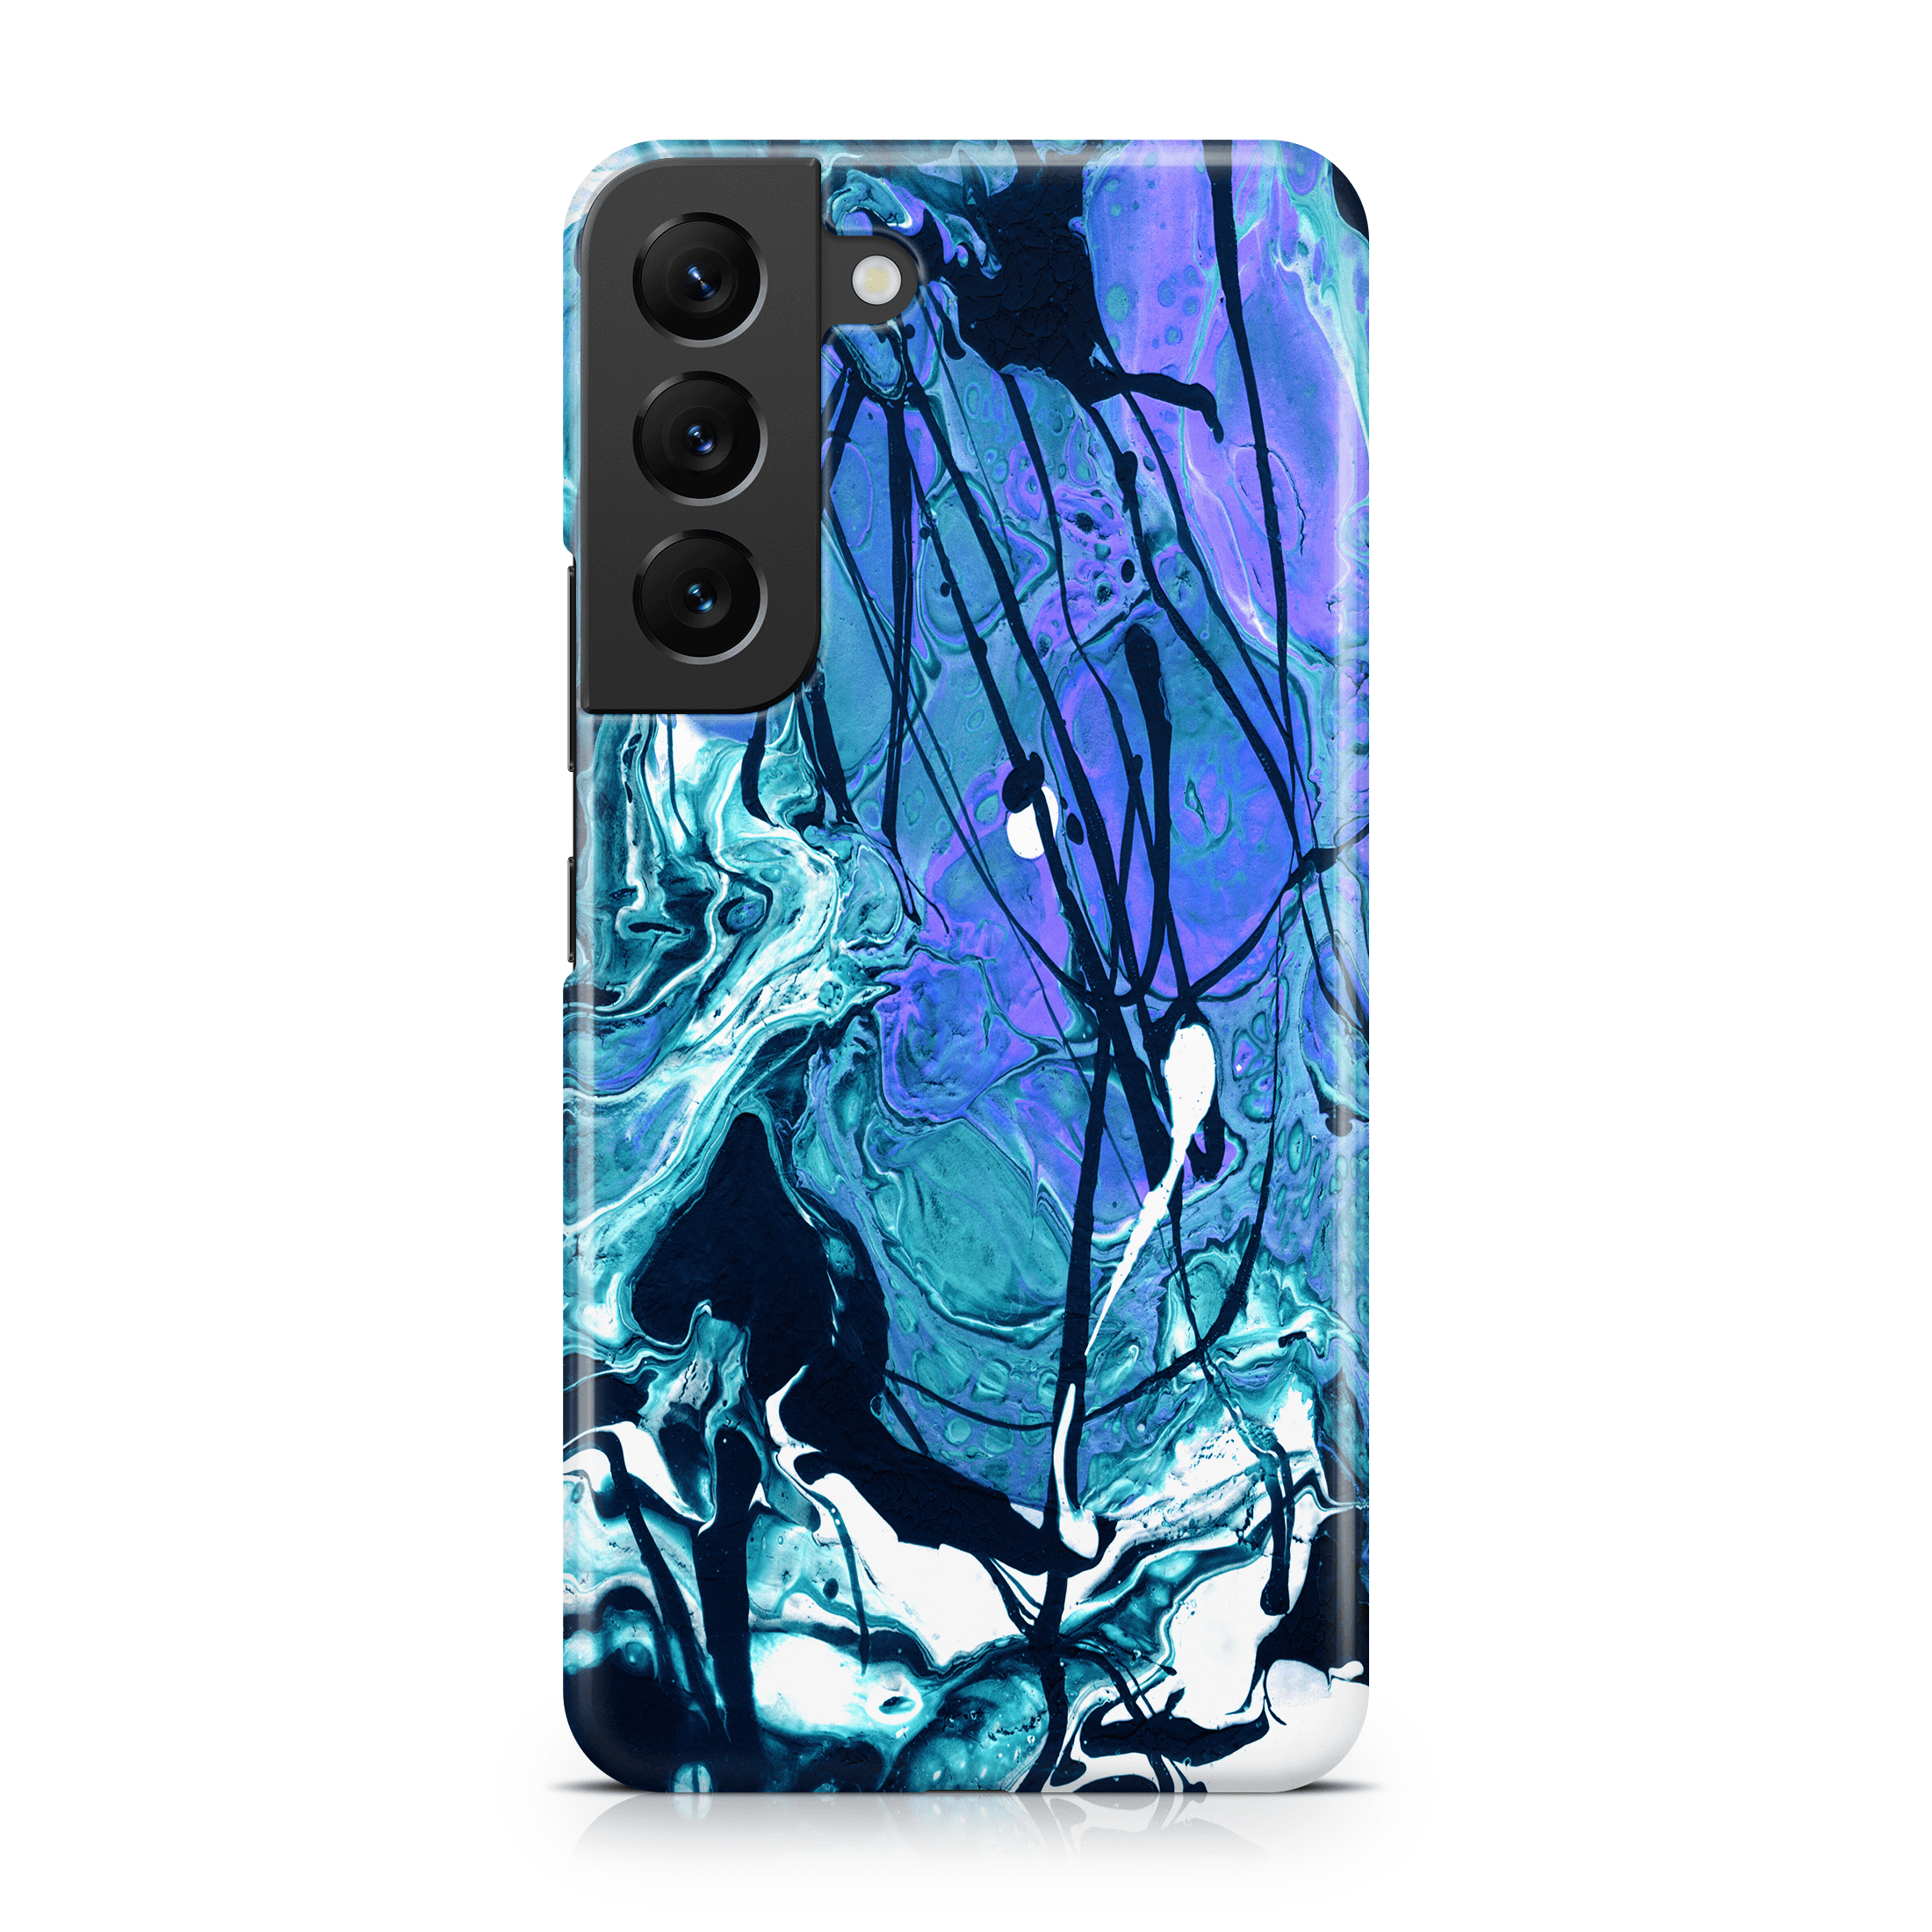 Blue Soul Acrylic - Samsung phone case designs by CaseSwagger